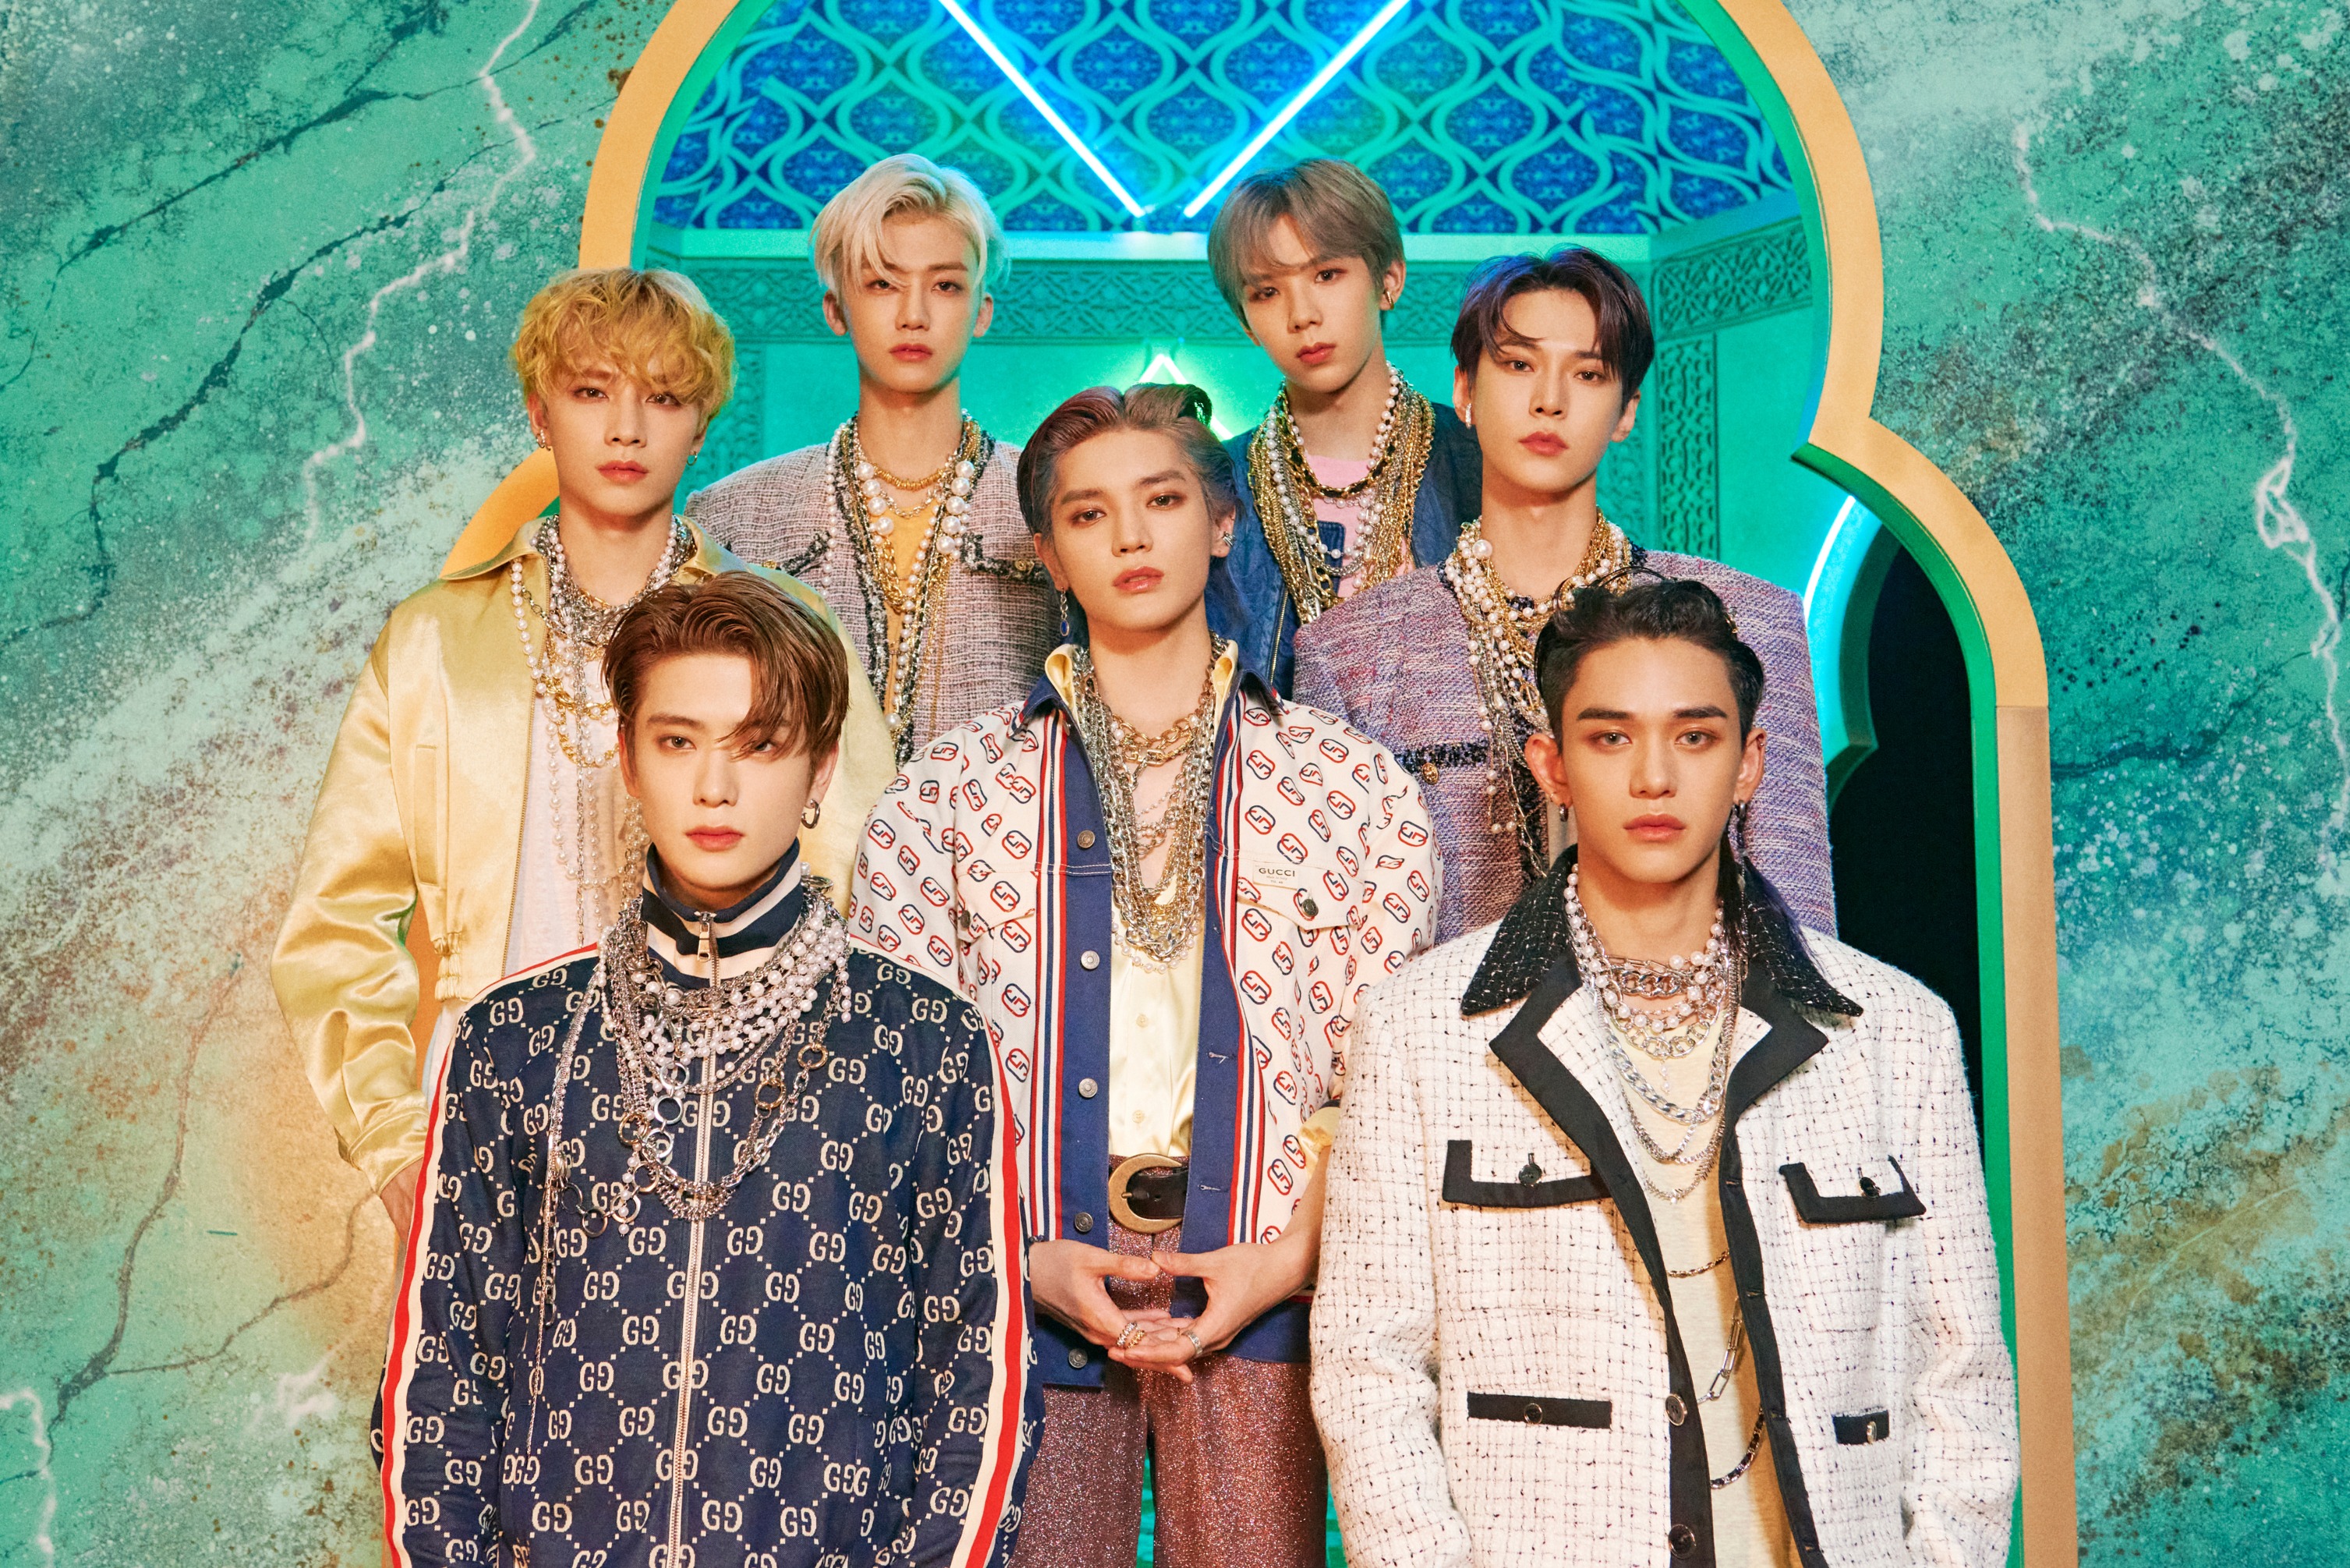 NCT 127 accused of cultural appropriation after sampling Maori haka